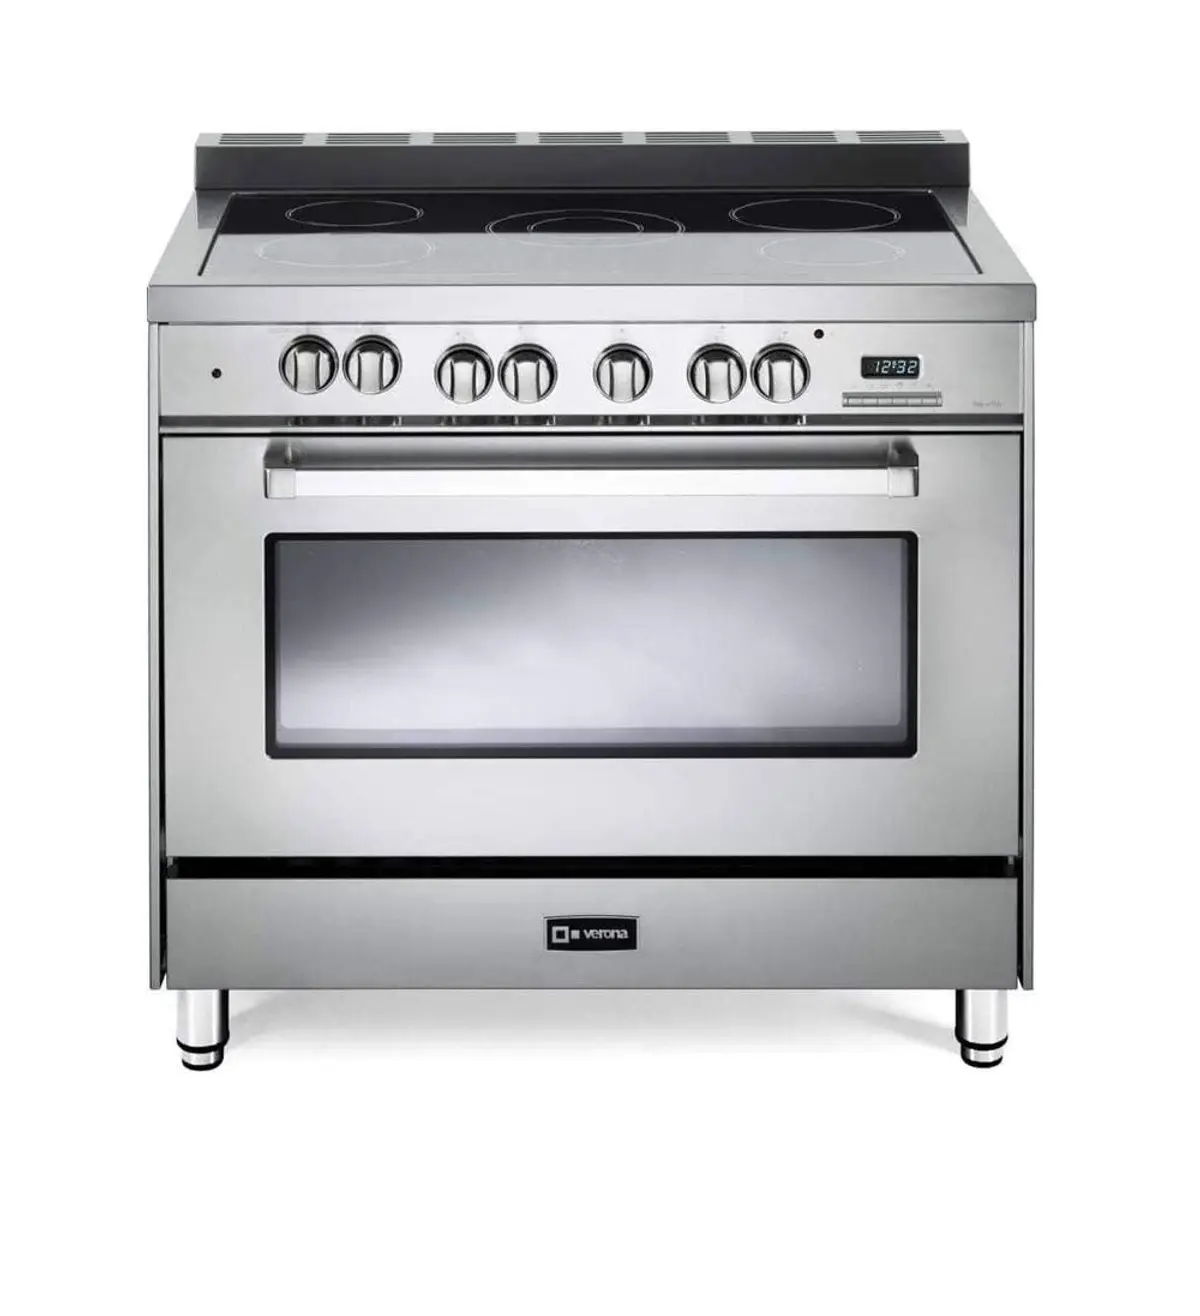 Verona 36 Inch Convection Oven review